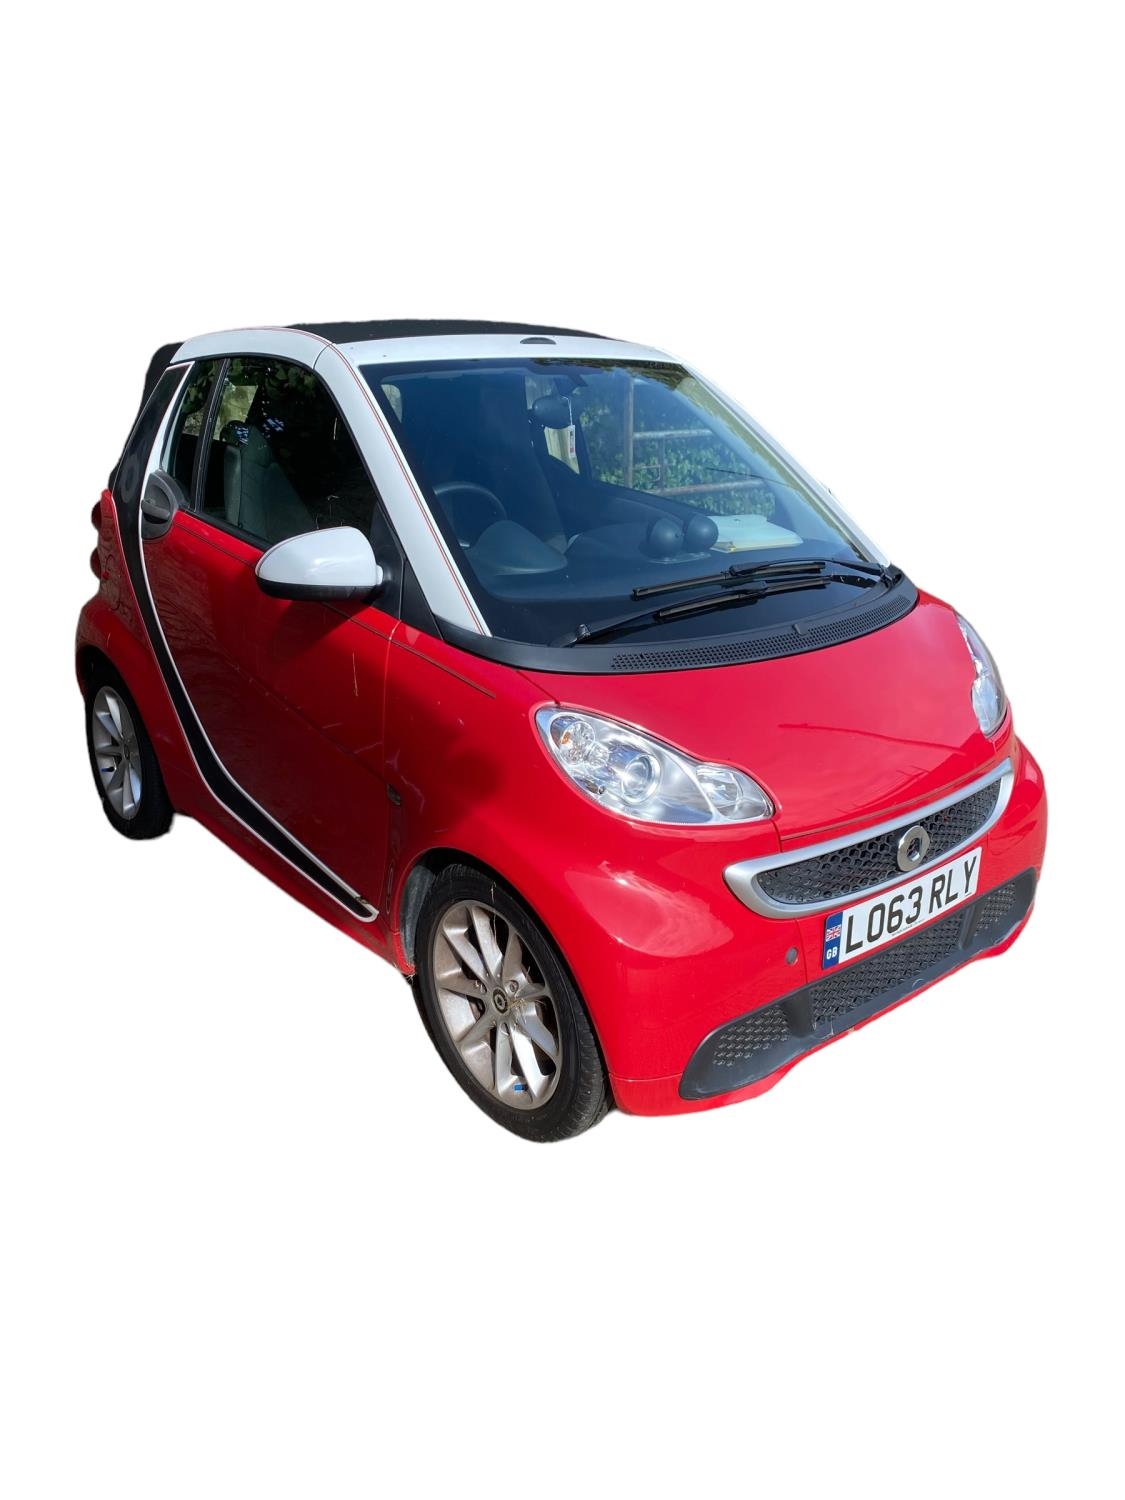 CAR: registration: LO63 RLY A red convertible automatic smart car, from a local deceased estate.